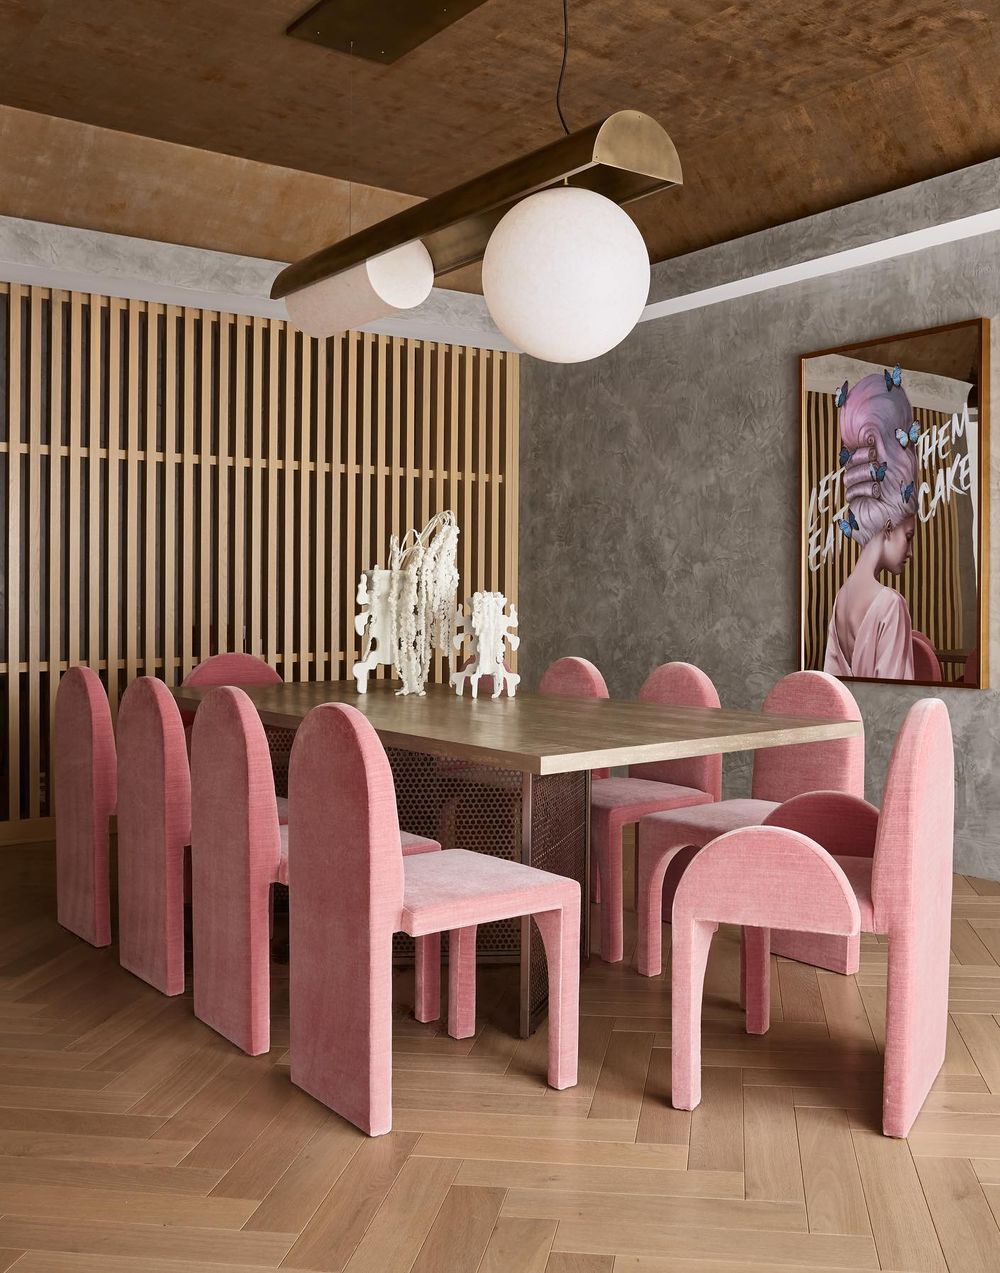 Slatted wall ideas dining room pink chairs widellboschetti